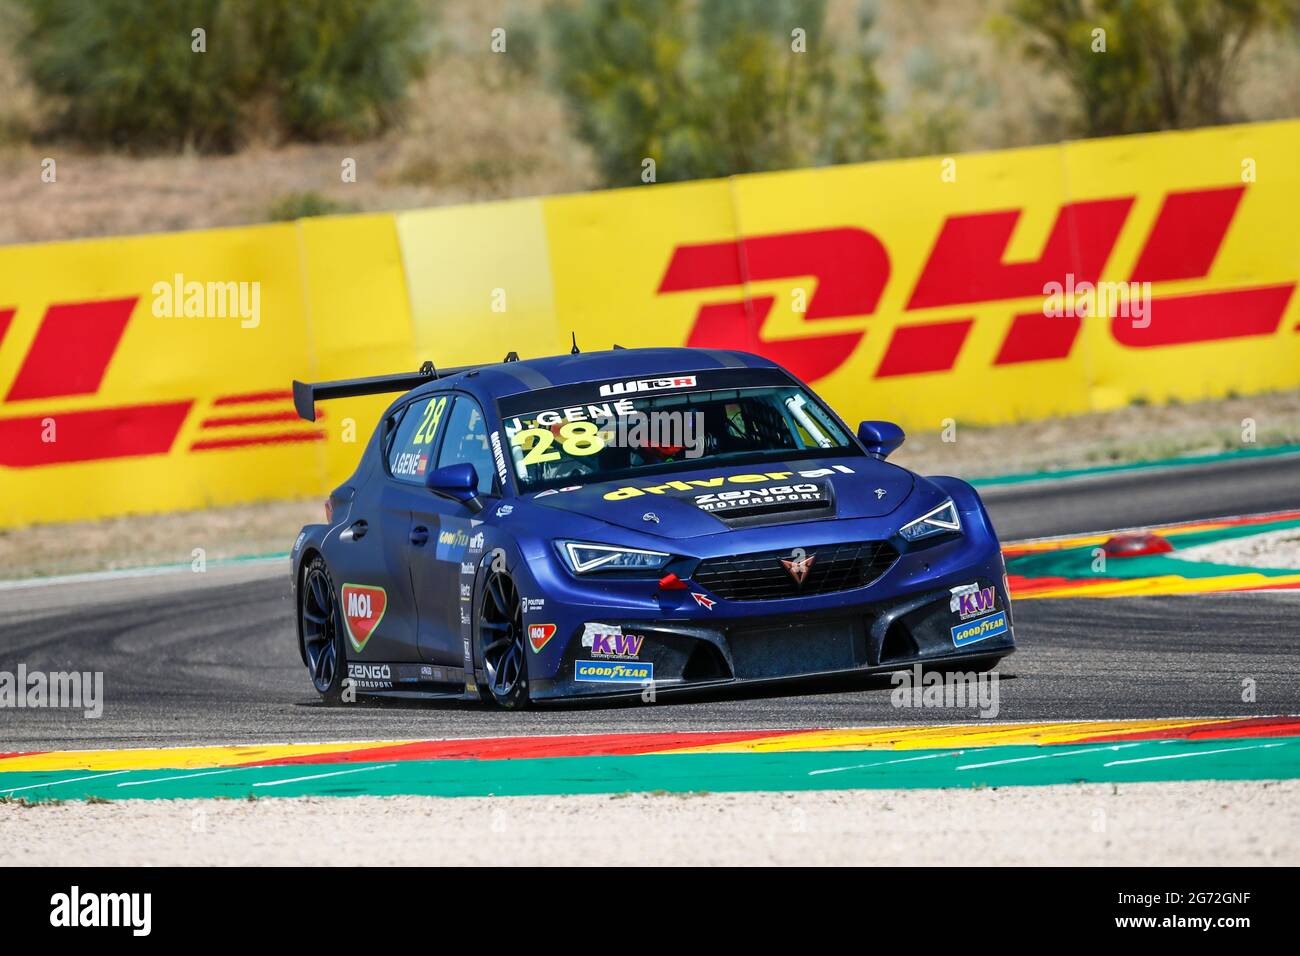 28 Gene Jordi (esp), Zengo Motorsport Drivers' Academy, Cupa Leon Competicion TCR, action during the 2021 FIA WTCR Race of Spain, 3rd round of the 2021 FIA World Touring Car Cup, on the Ciudad del Motor de Aragon, from July 10 to 11, 2021 in Alcaniz, Spain - Photo Xavi Bonilla / DPPI Stock Photo